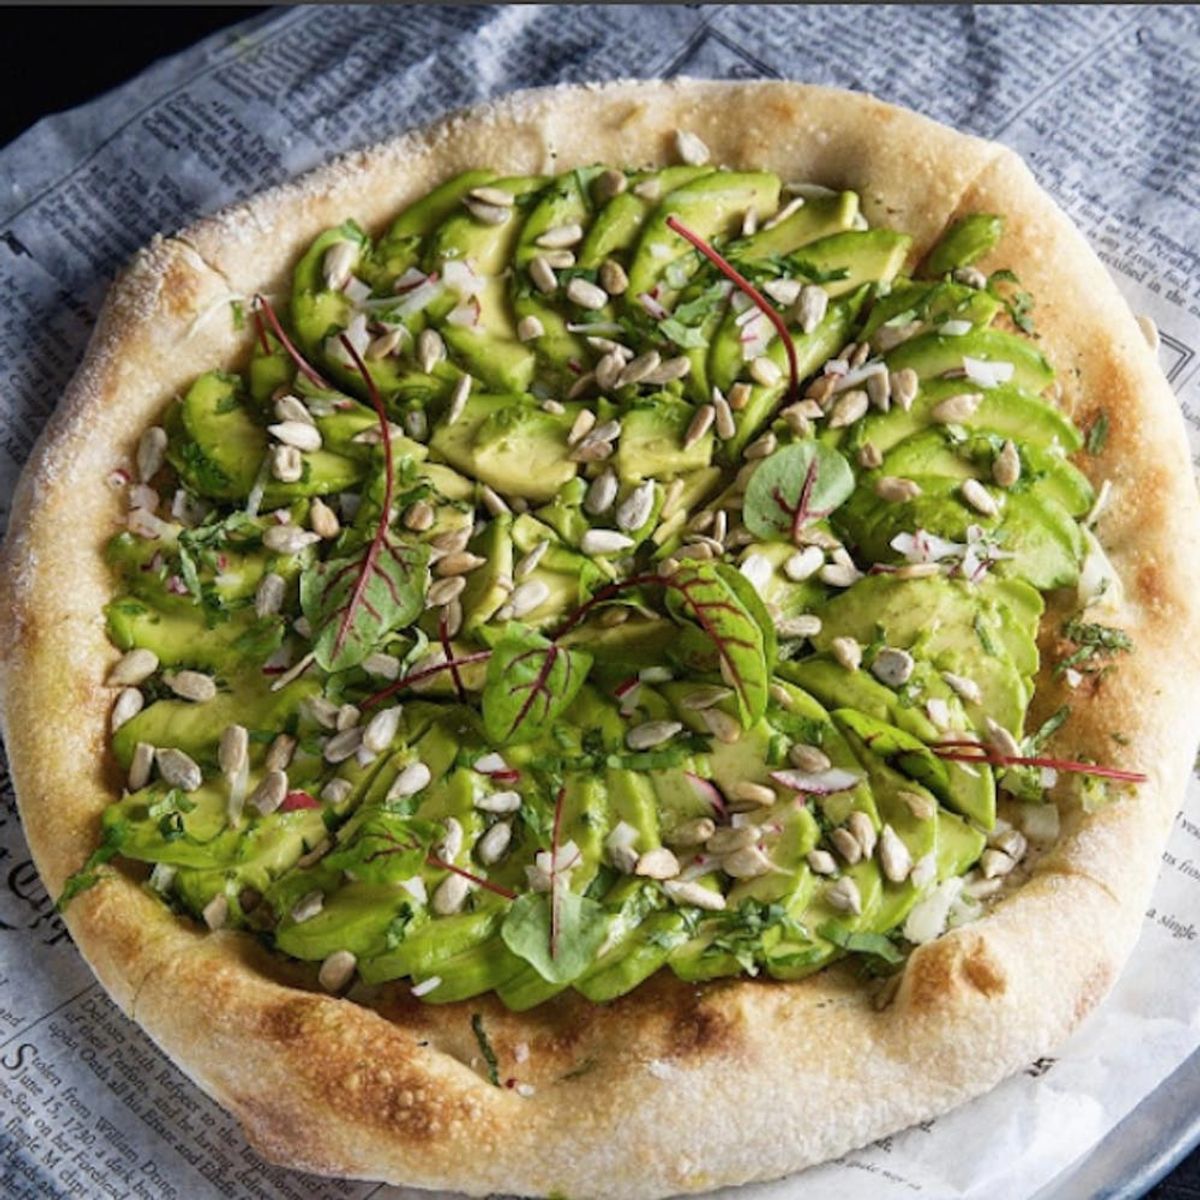 Avocado Pizza Is Here to Give Cauliflower Pizza a Run for Its Money